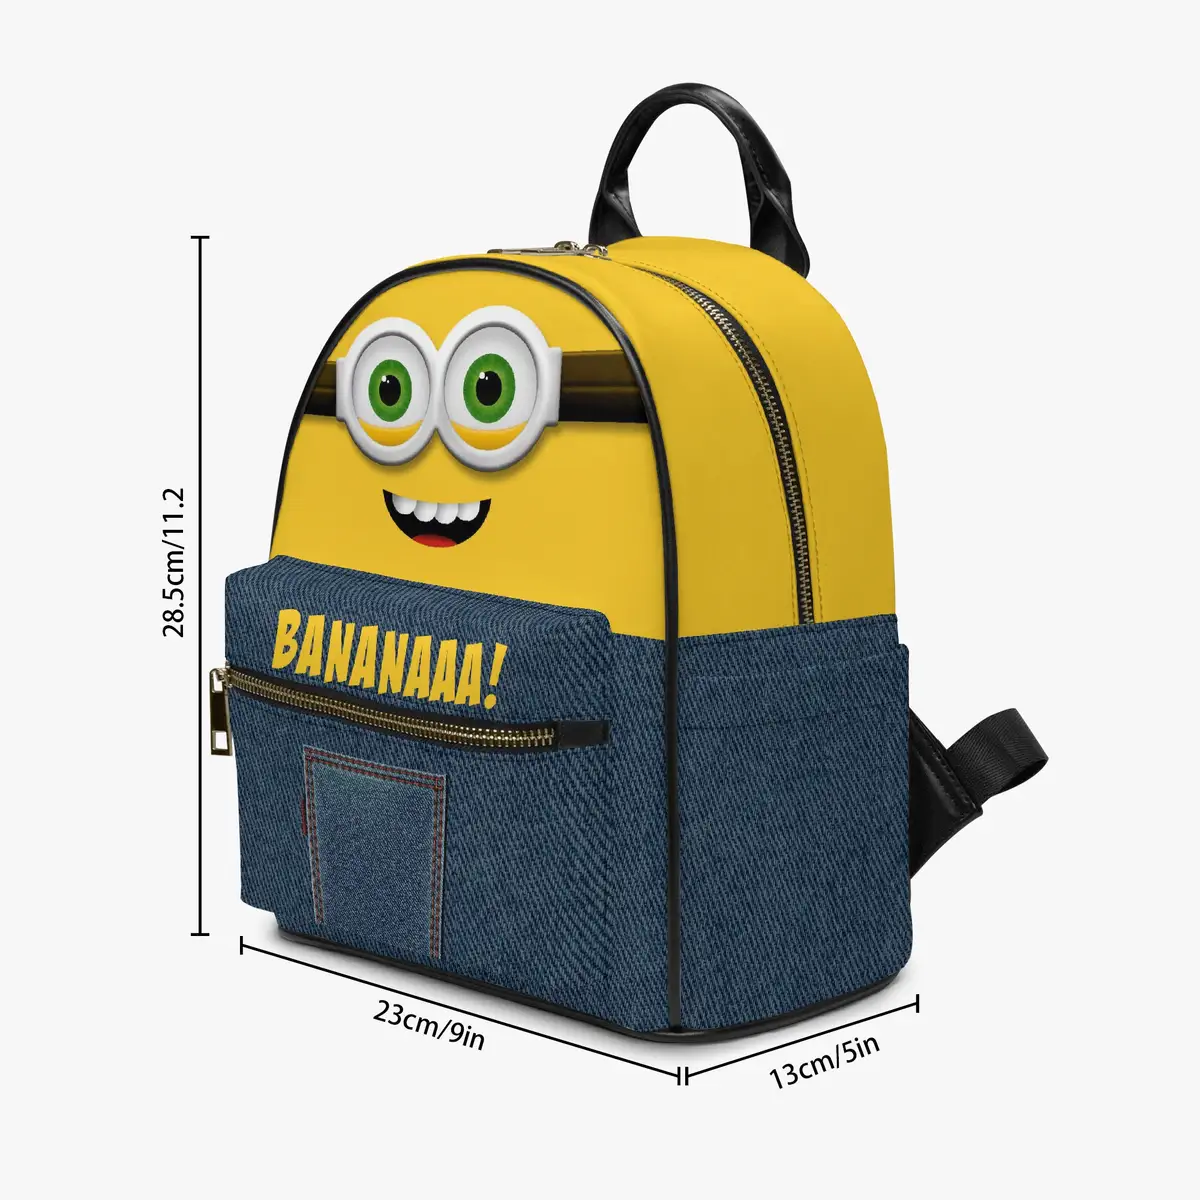 Yellow and Denim Simulation Minions Face Little Backpack – Fun All-Over Print Leather Street Bag for Girls Cool Kiddo 22